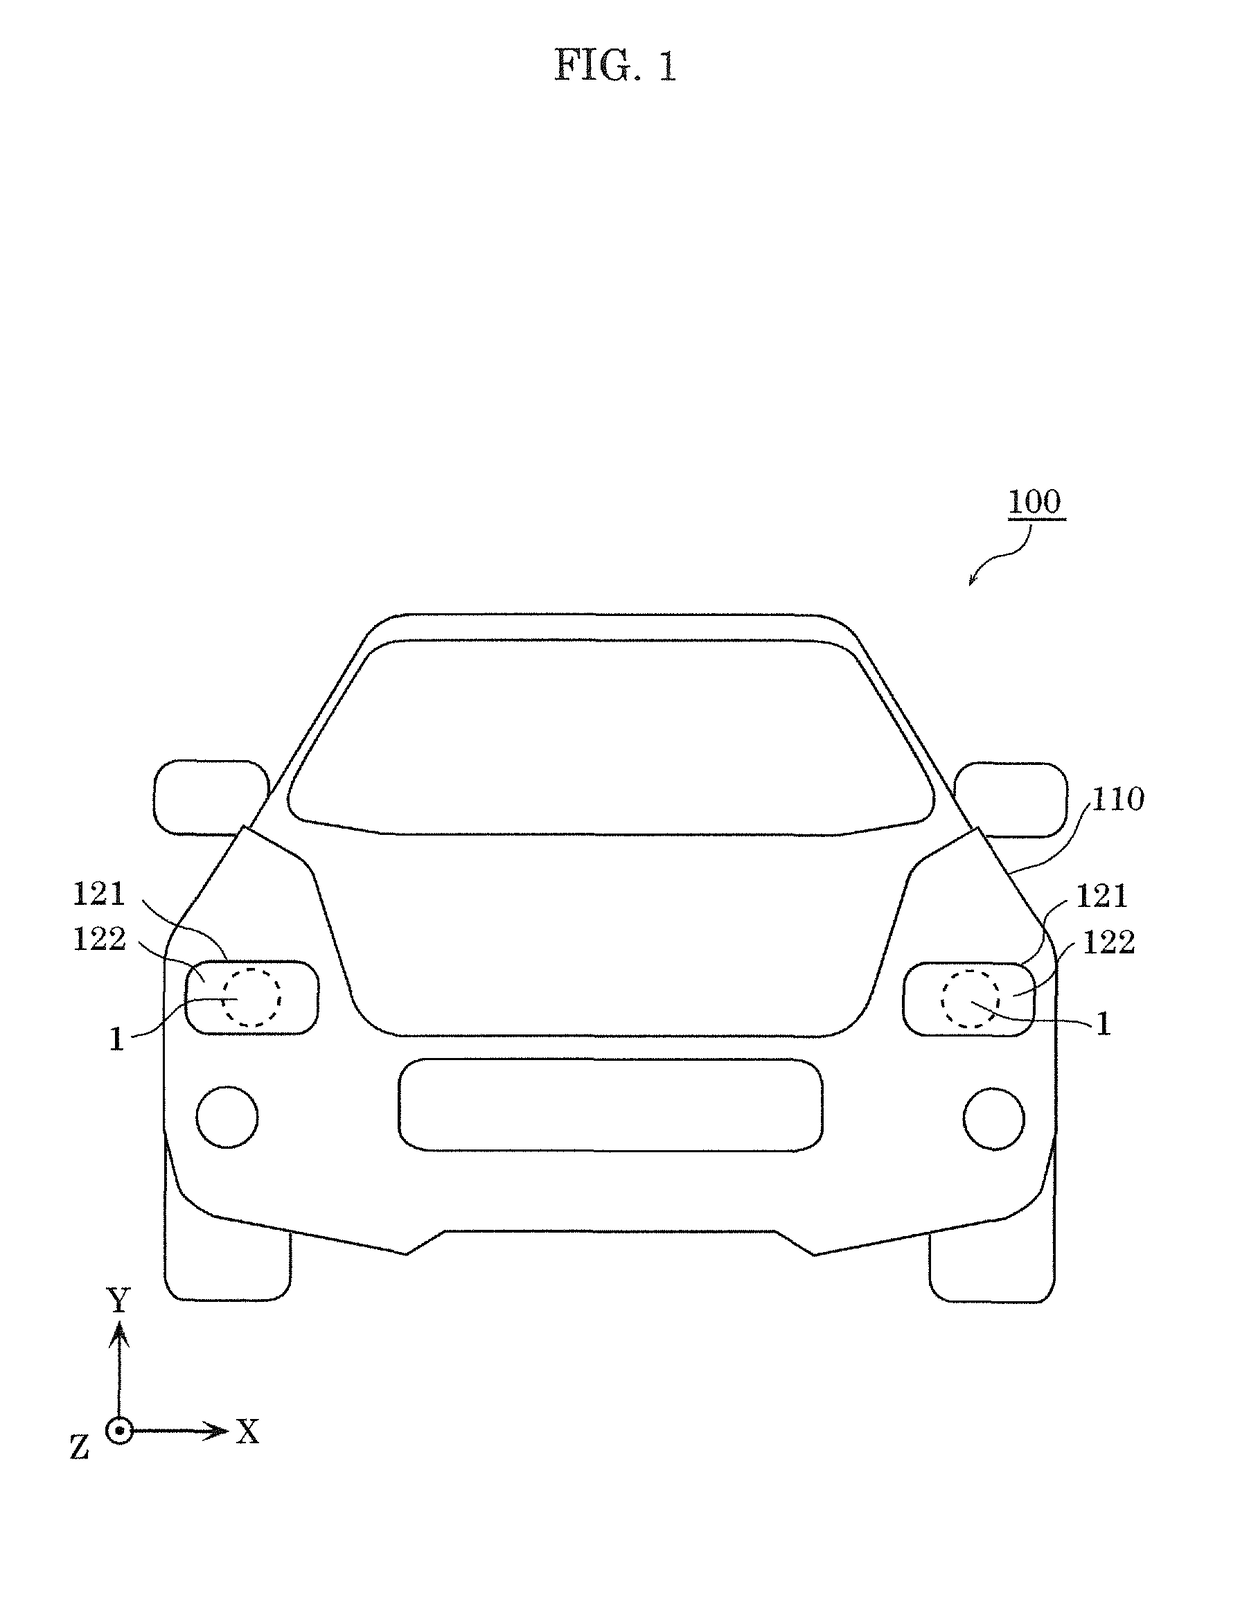 Lighting apparatus, automobile, and projection lens